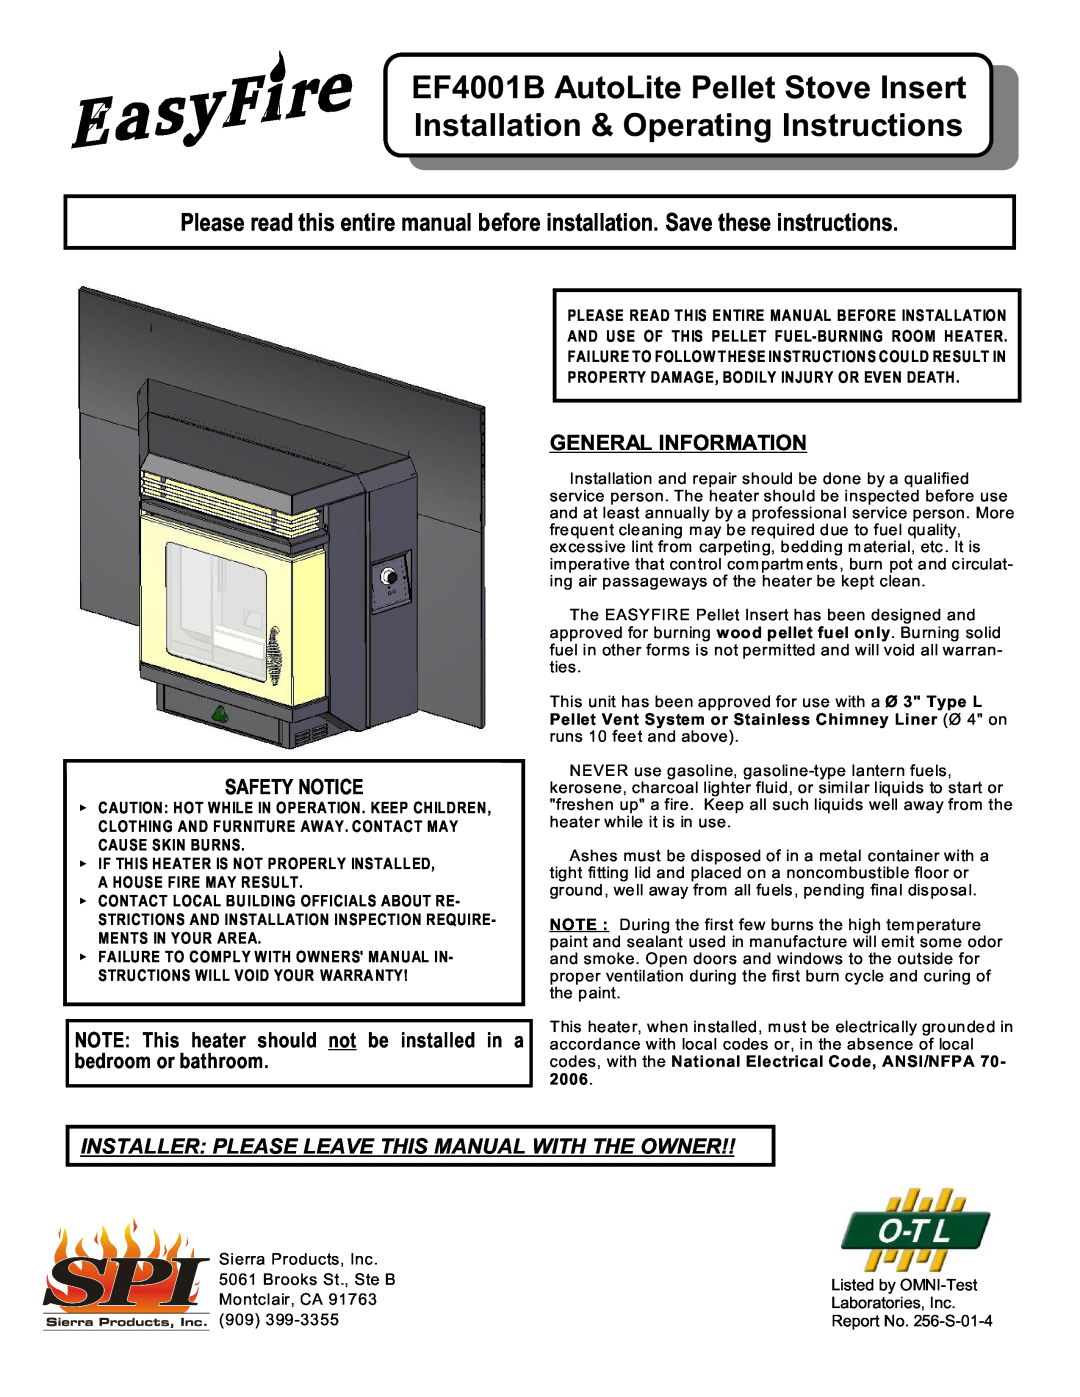 Sierra Products EF-4001B operating instructions Safety Notice, General Information, EF4001B AutoLite Pellet Stove Insert 